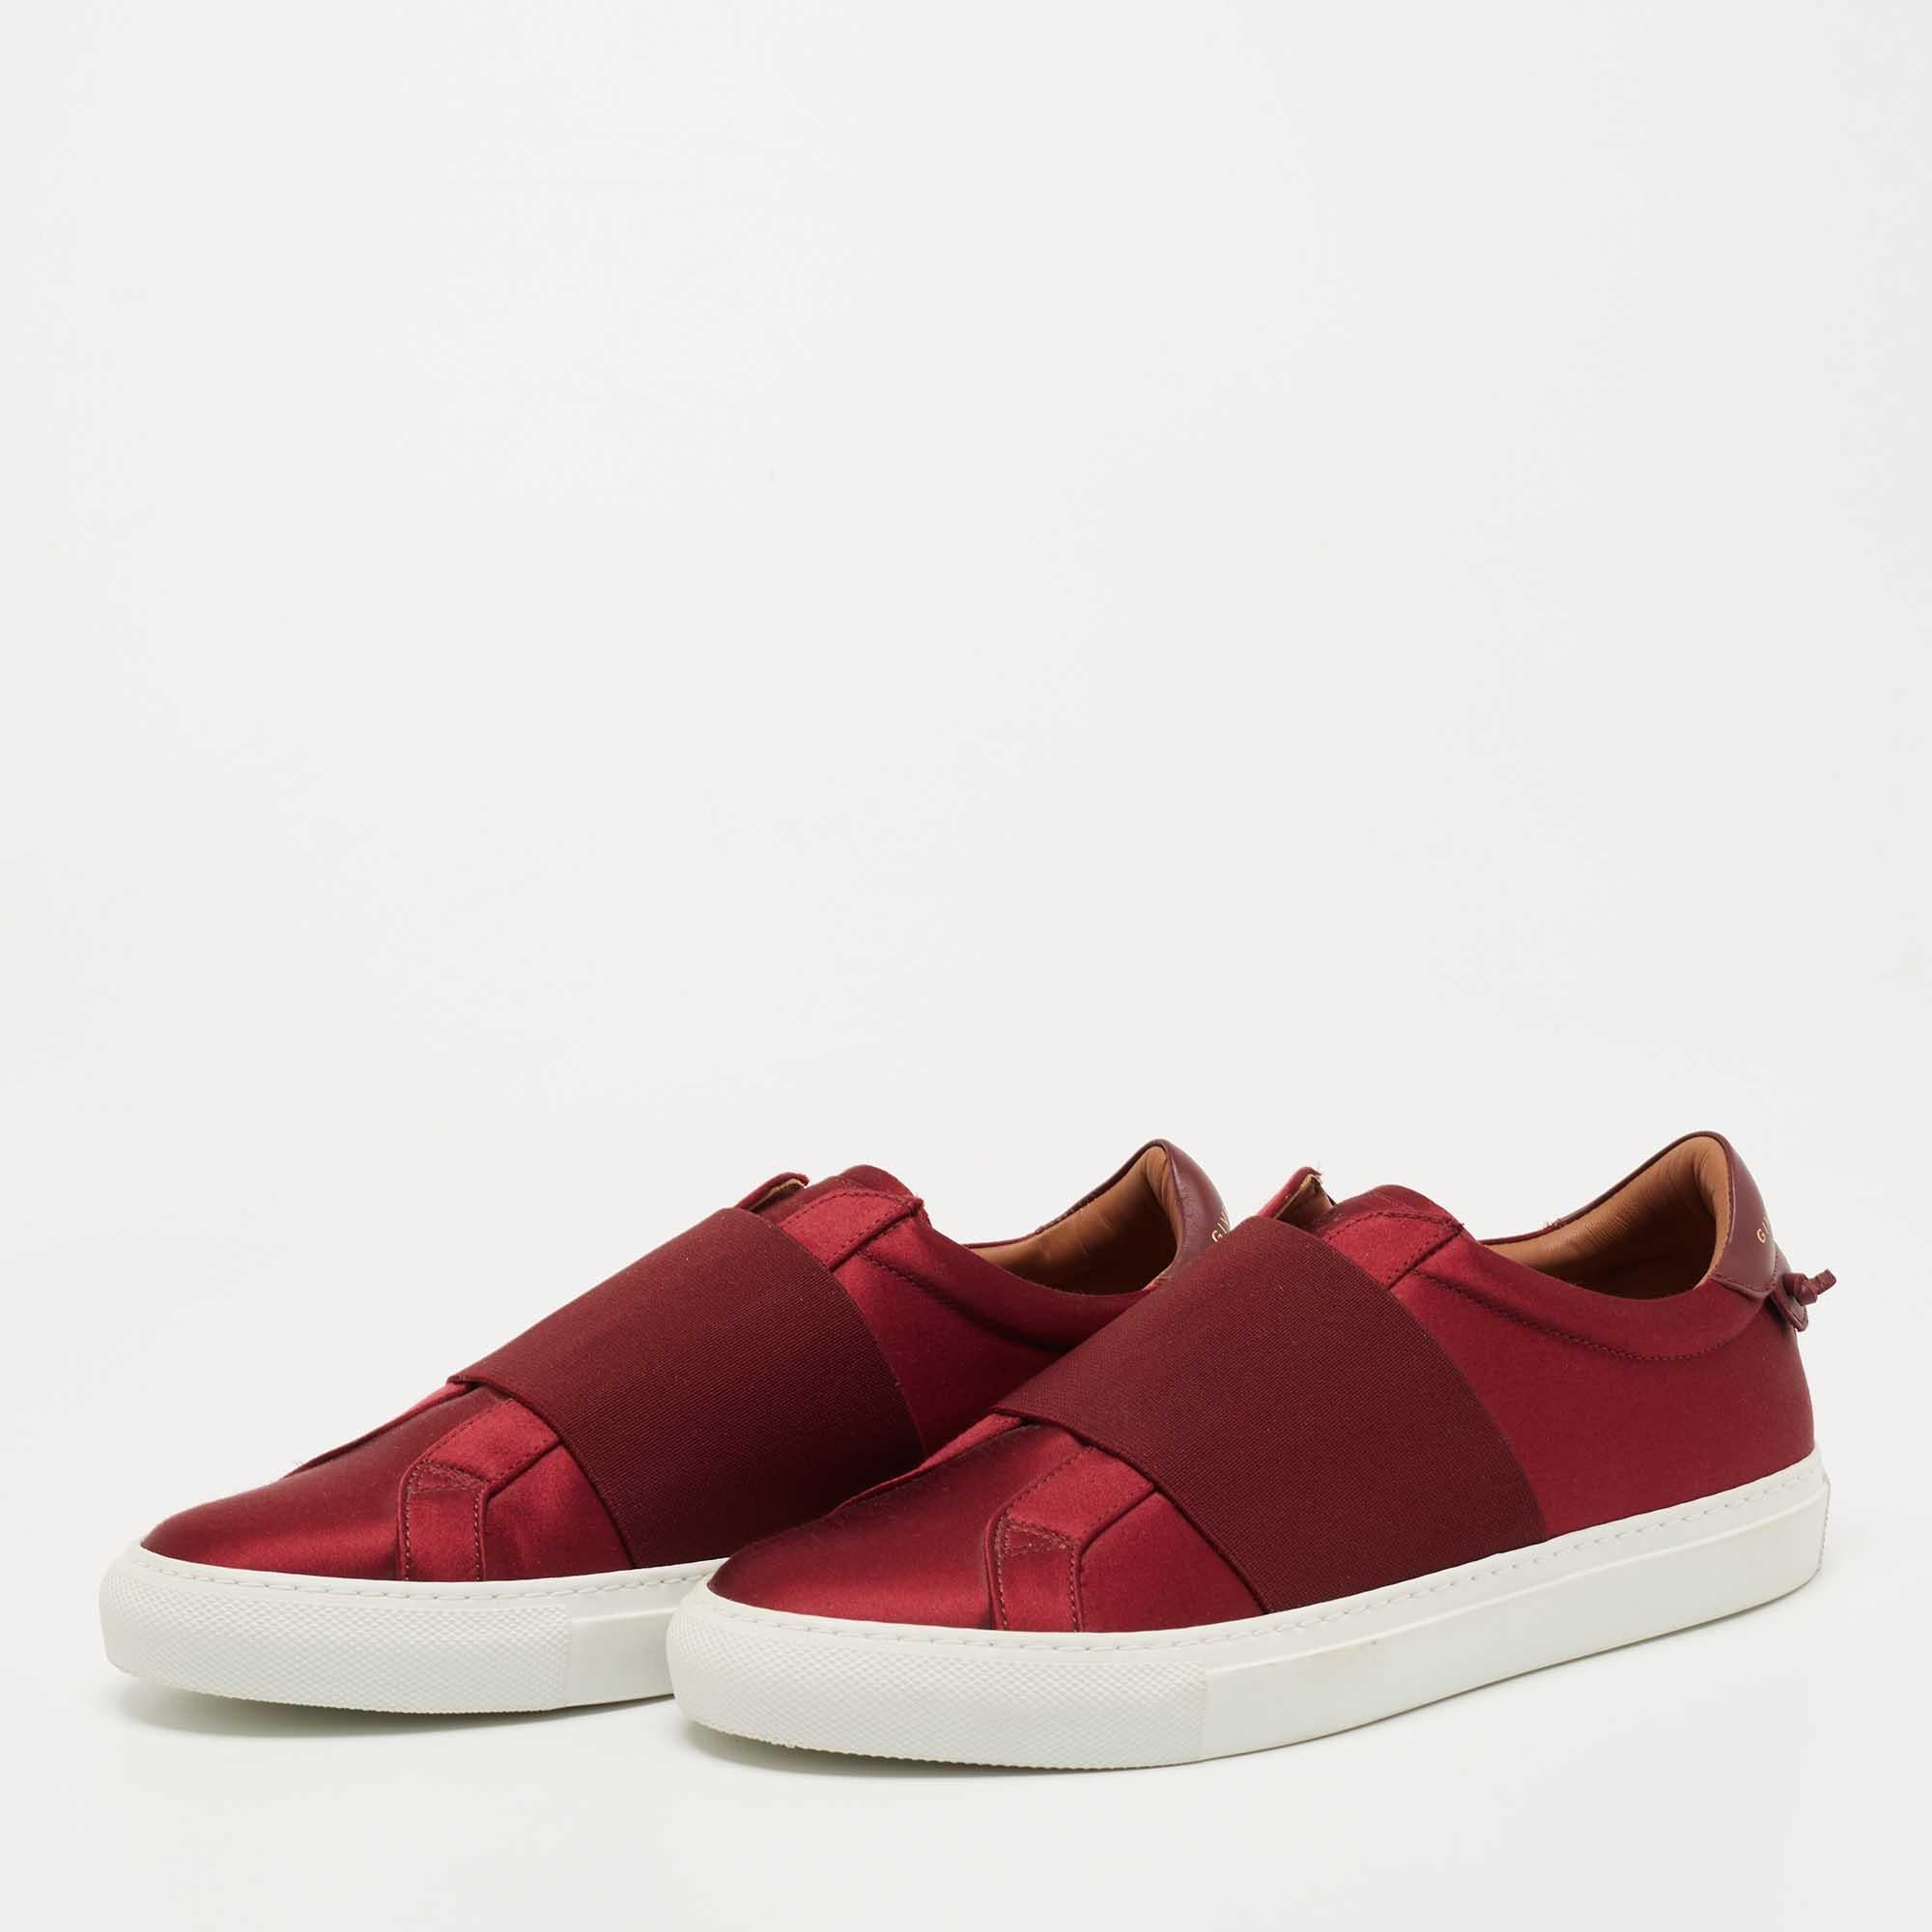 Givenchy Burgundy Satin and Elastic Band Slip On Sneakers Size 40 For Sale 3